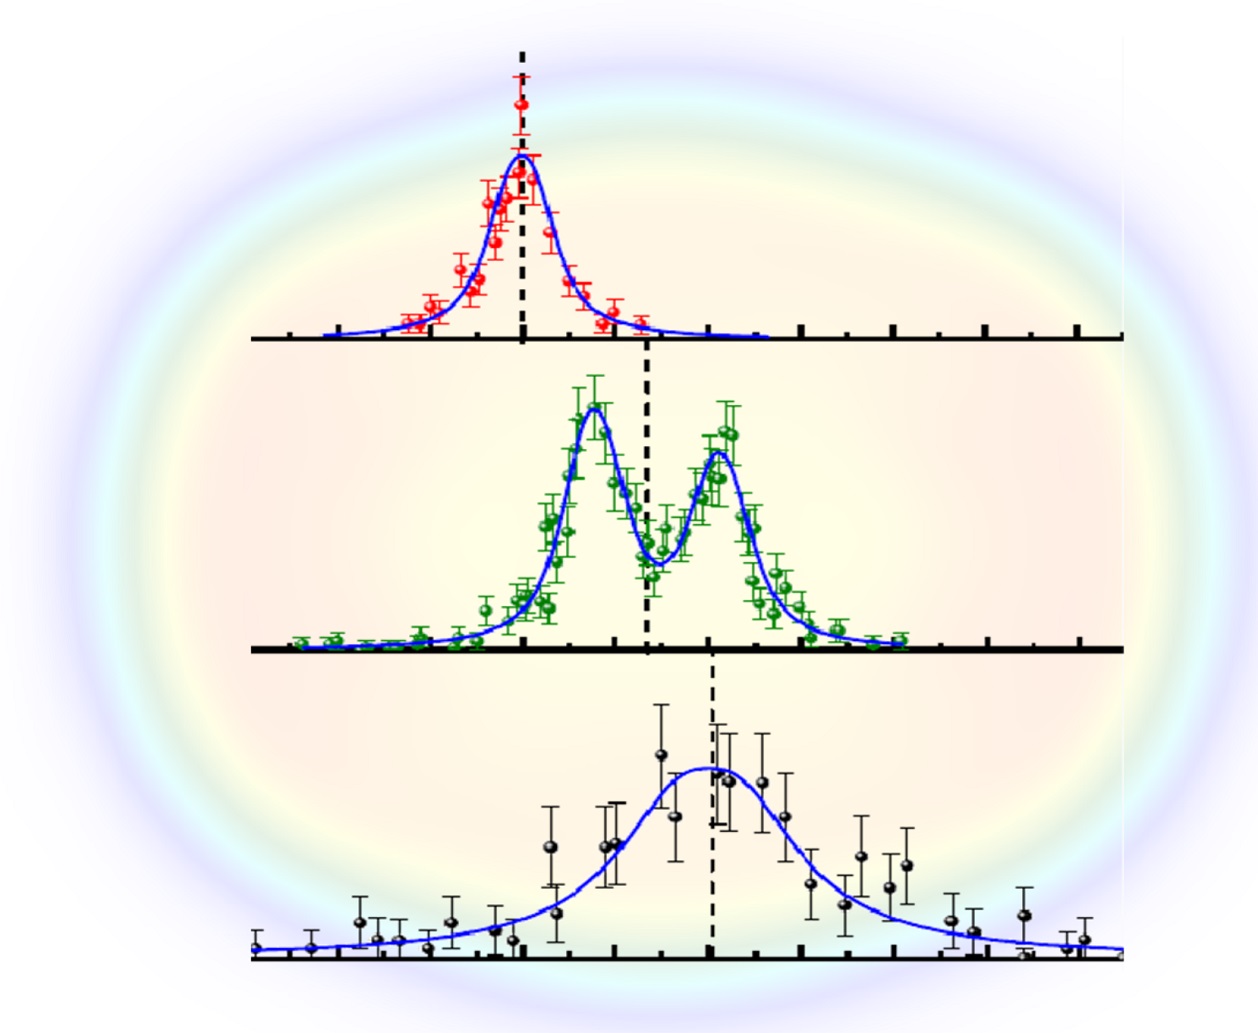 The experimental spectra from the laser spectroscopy of the three nobelium isotopes are shown in front of the calculated charge density distribution of No-254